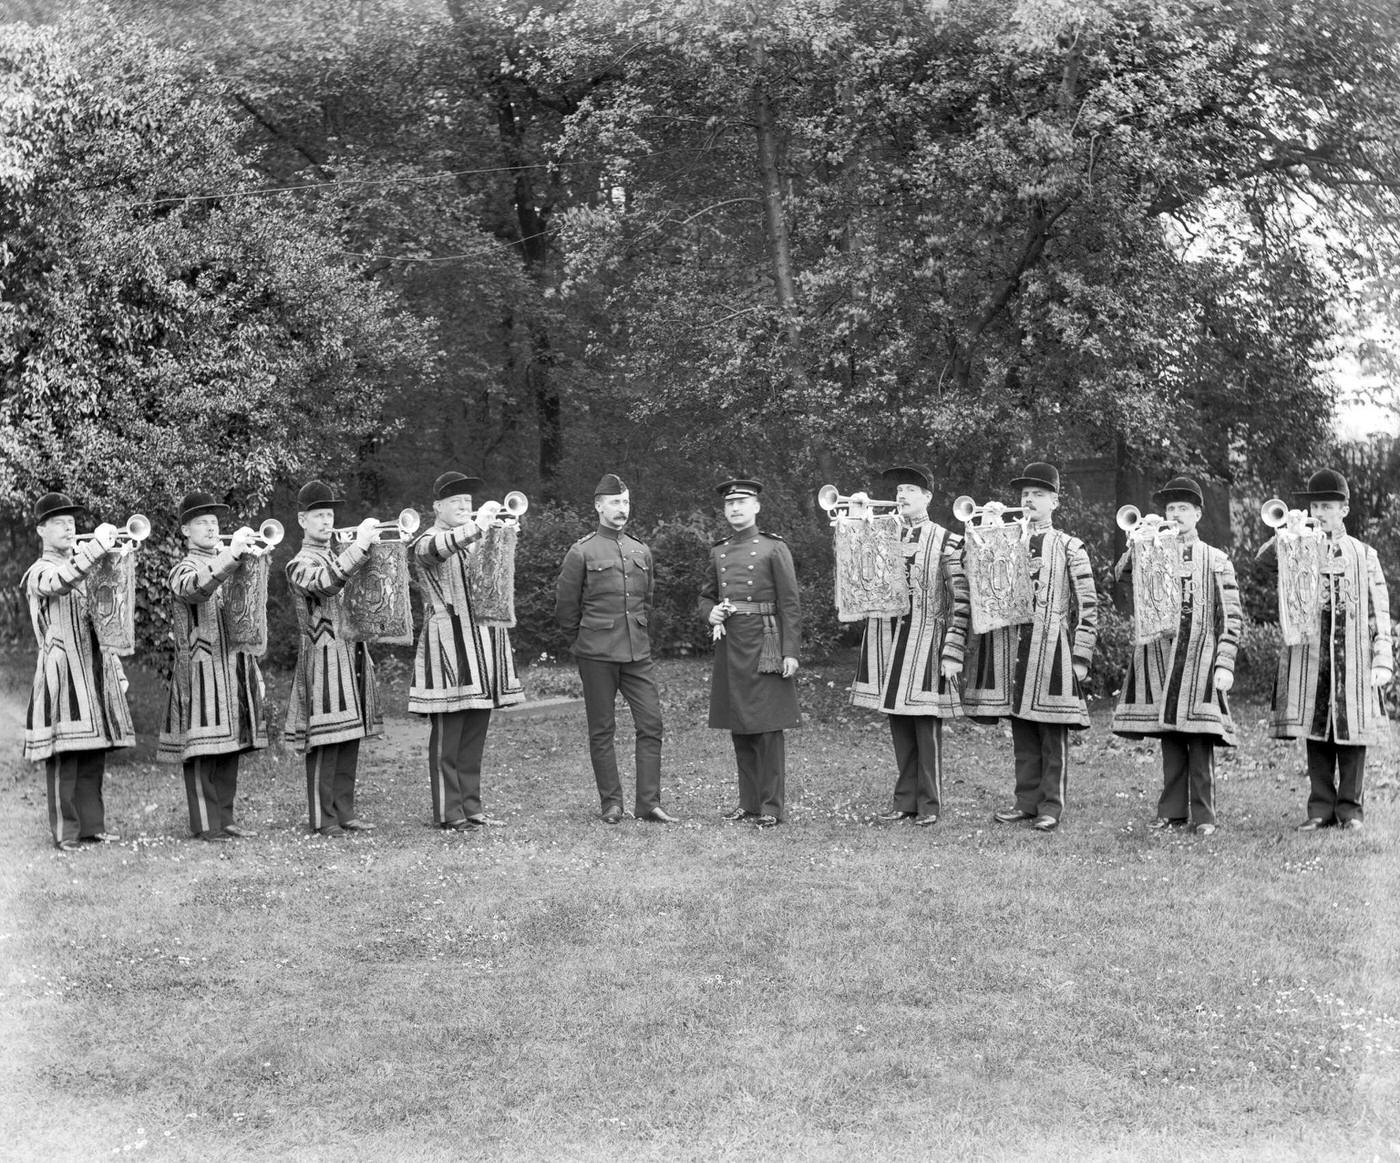 Coronation trumpeters at the Royal Military School of Music at Kneller Hall, Twickenham, 1905